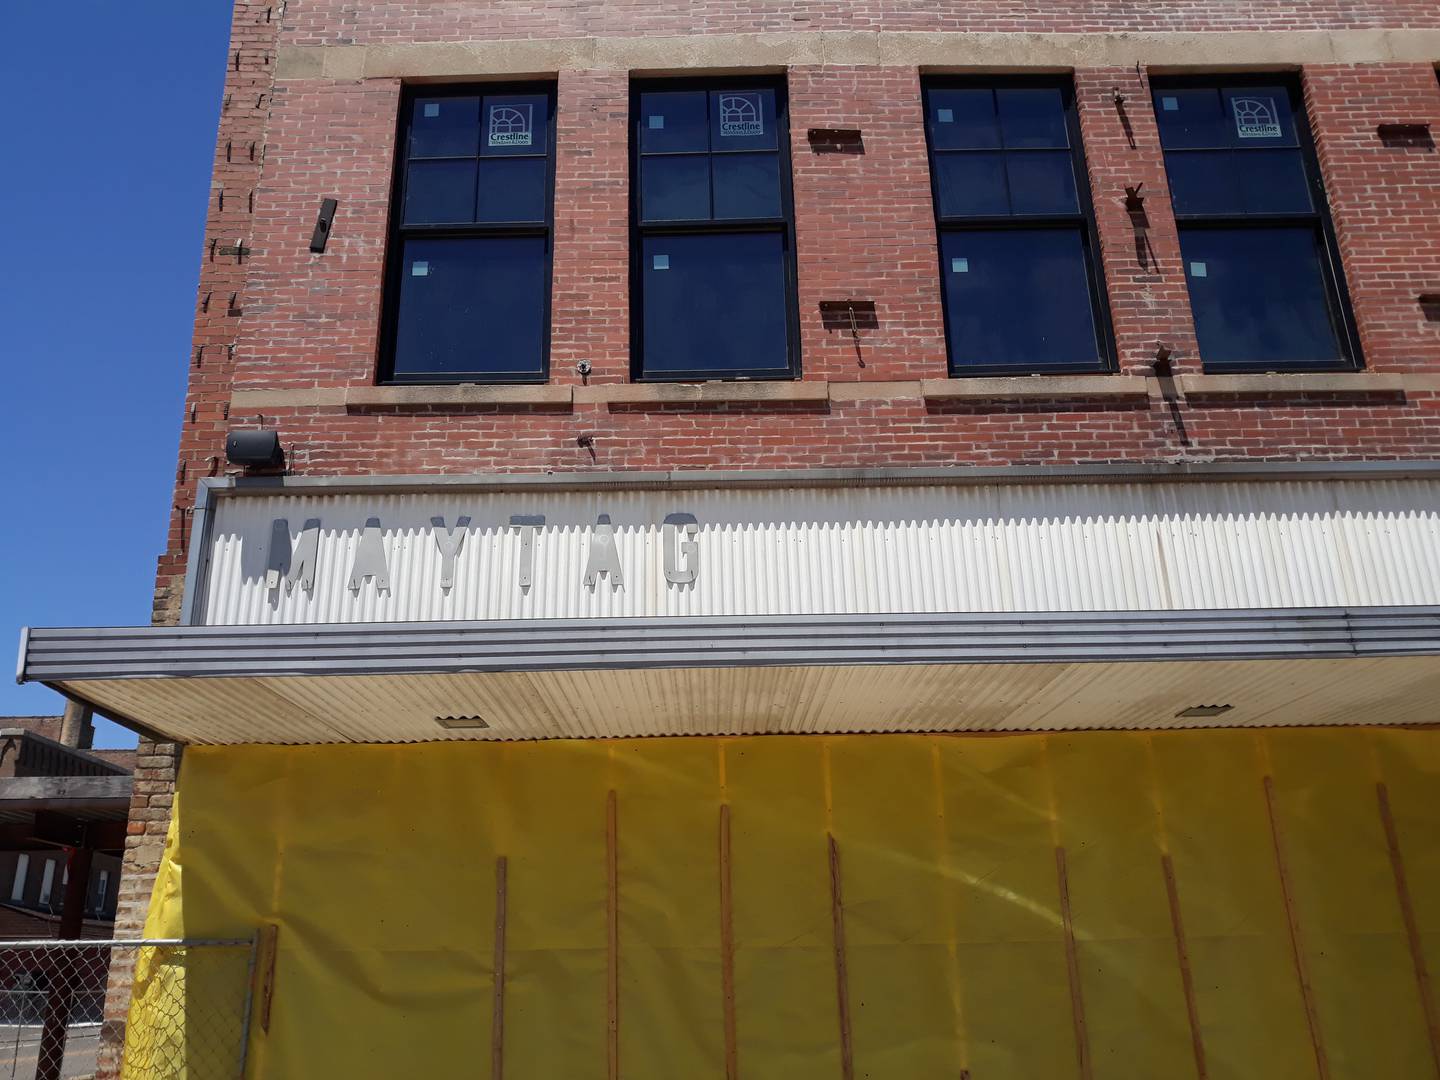 The renovation project to create the Rocket Brewpub in downtown La Salle will be finished by the beginning of the second quarter of 2023, according to CL Real Estate Development President Nathan Watson.